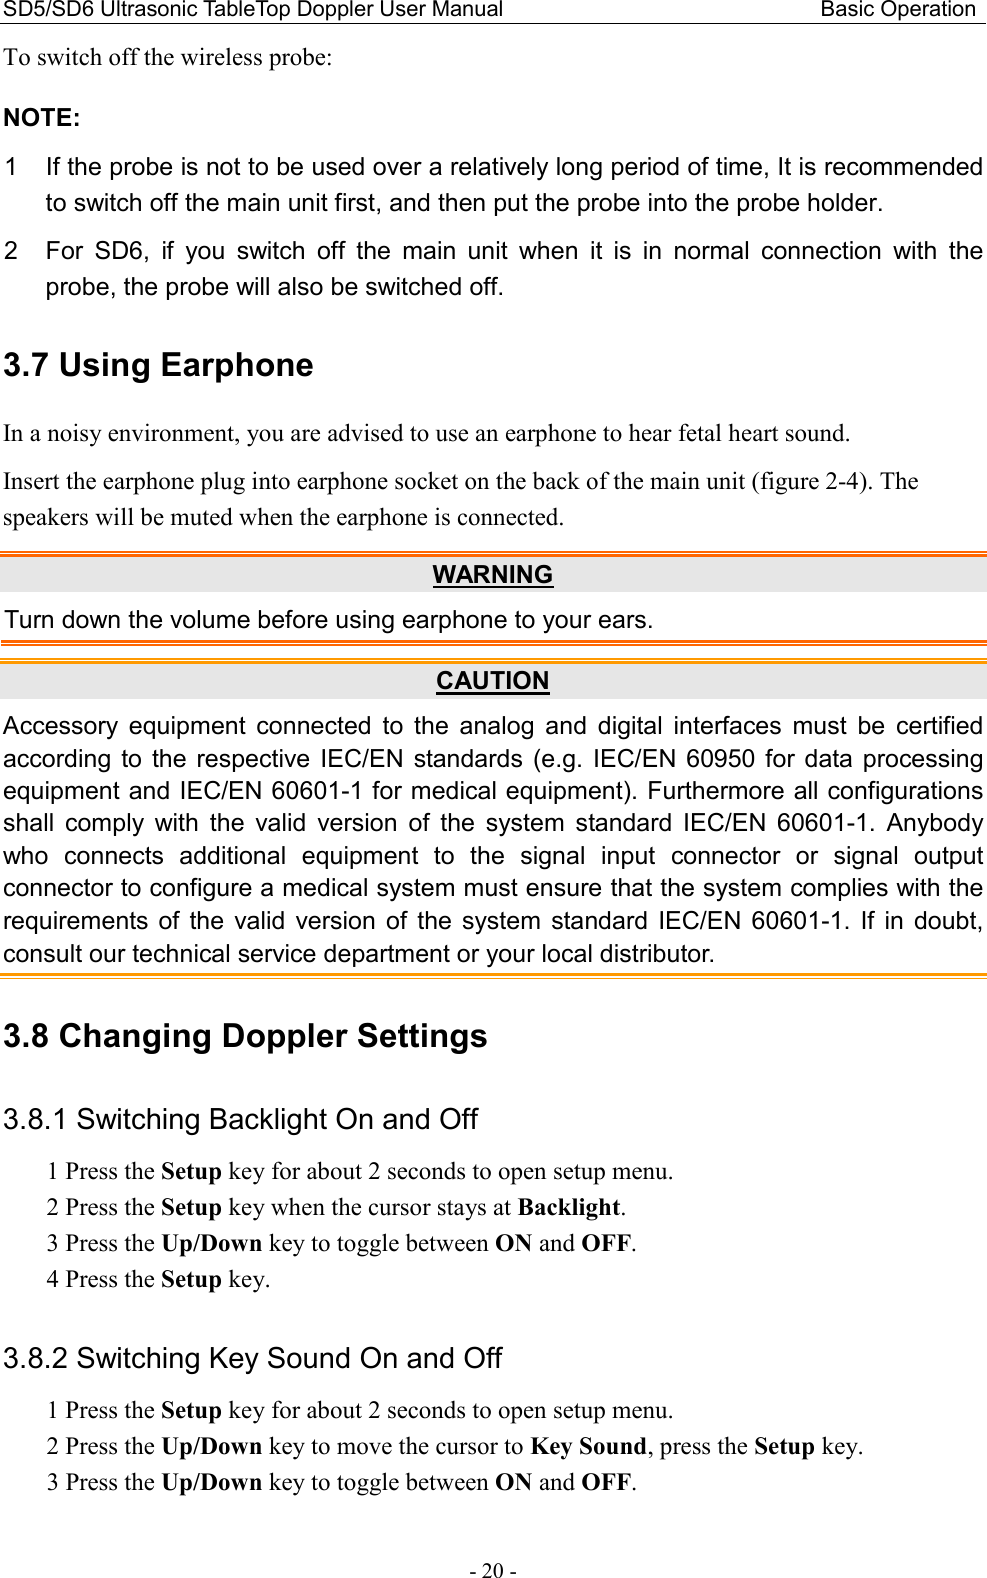 SD5/SD6 Ultrasonic TableTop Doppler User Manual                                                          Basic Operation - 20 - To switch off the wireless probe: NOTE: 1  If the probe is not to be used over a relatively long period of time, It is recommended to switch off the main unit first, and then put the probe into the probe holder. 2  For  SD6,  if  you  switch  off  the  main  unit  when  it  is  in  normal  connection  with  the probe, the probe will also be switched off. 3.7 Using Earphone In a noisy environment, you are advised to use an earphone to hear fetal heart sound. Insert the earphone plug into earphone socket on the back of the main unit (figure 2-4). The speakers will be muted when the earphone is connected. WARNING Turn down the volume before using earphone to your ears. CAUTION Accessory  equipment  connected  to  the  analog  and  digital  interfaces  must  be  certified according  to  the  respective  IEC/EN standards (e.g.  IEC/EN  60950  for data processing equipment and IEC/EN 60601-1 for medical equipment). Furthermore all configurations shall  comply  with  the  valid  version  of  the  system  standard  IEC/EN  60601-1.  Anybody who  connects  additional  equipment  to  the  signal  input  connector  or  signal  output connector to configure a medical system must ensure that the system complies with the requirements  of  the  valid  version  of  the  system  standard  IEC/EN  60601-1.  If  in  doubt, consult our technical service department or your local distributor. 3.8 Changing Doppler Settings 3.8.1 Switching Backlight On and Off 1 Press the Setup key for about 2 seconds to open setup menu. 2 Press the Setup key when the cursor stays at Backlight. 3 Press the Up/Down key to toggle between ON and OFF. 4 Press the Setup key.  3.8.2 Switching Key Sound On and Off 1 Press the Setup key for about 2 seconds to open setup menu. 2 Press the Up/Down key to move the cursor to Key Sound, press the Setup key. 3 Press the Up/Down key to toggle between ON and OFF. 